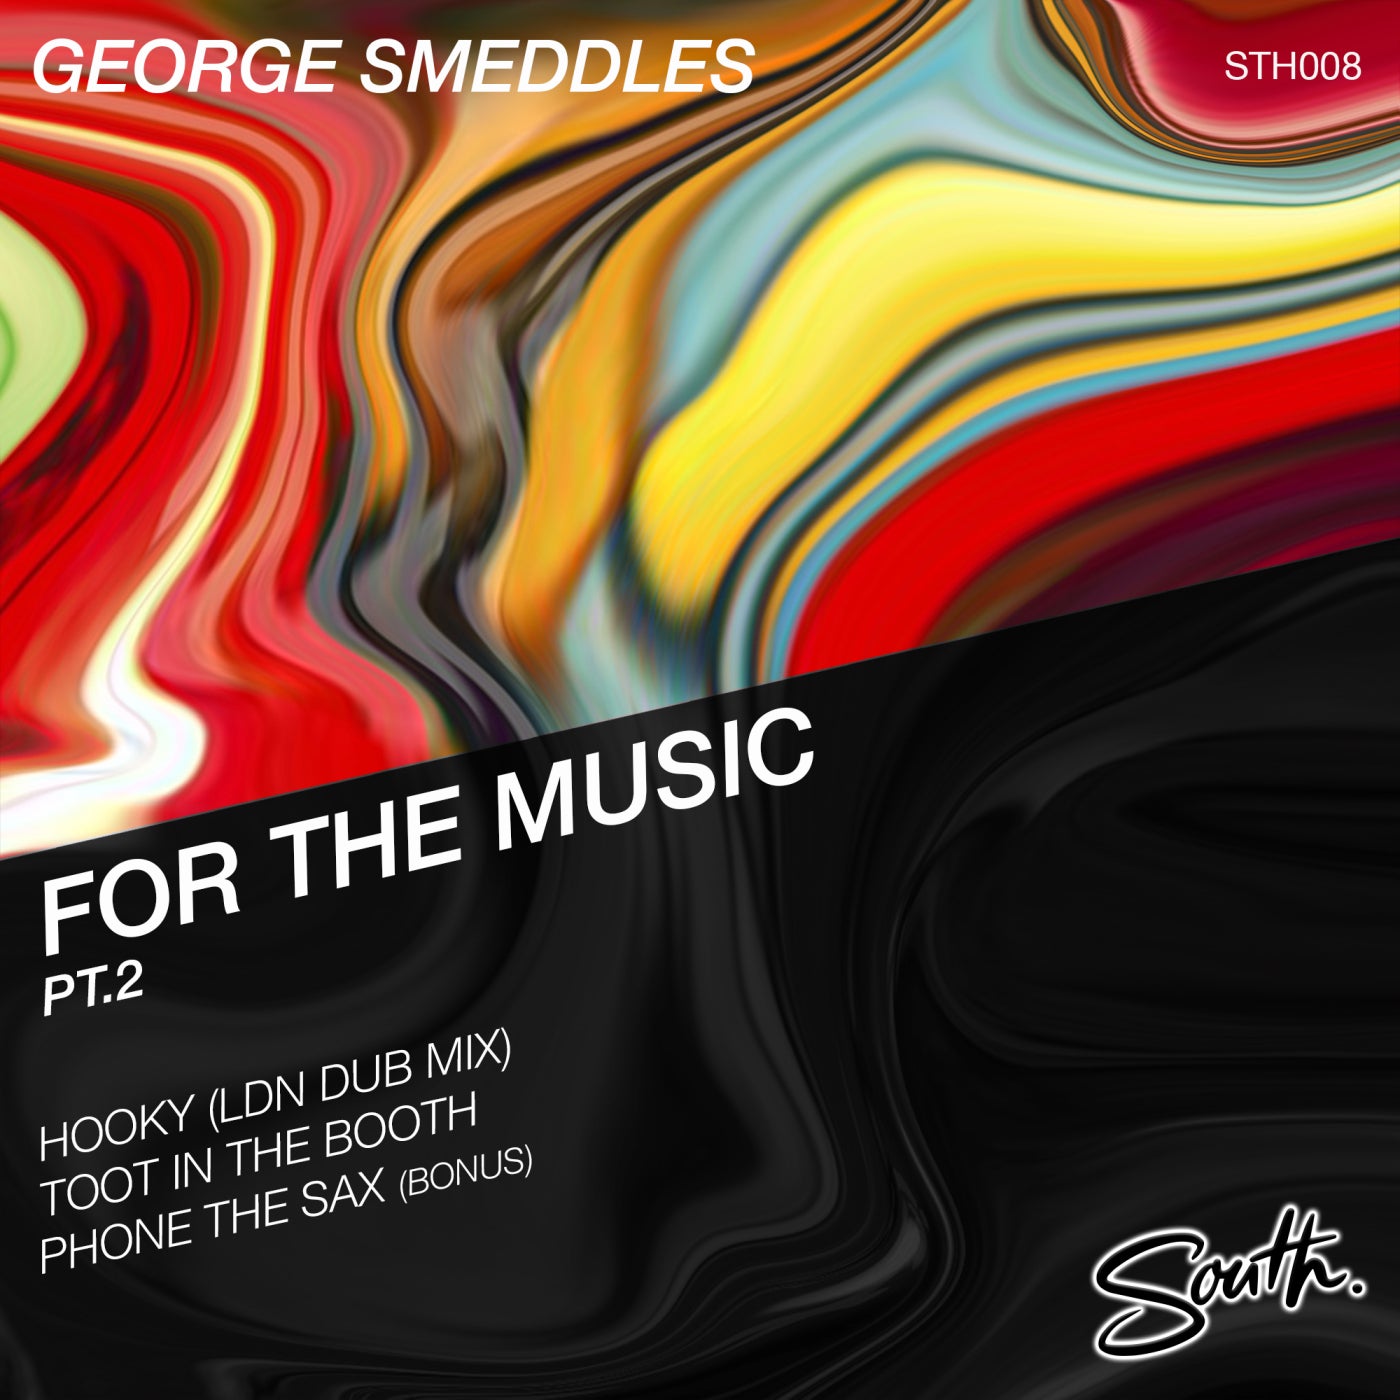 image cover: George Smeddles - For The Music, Pt. 2 on South